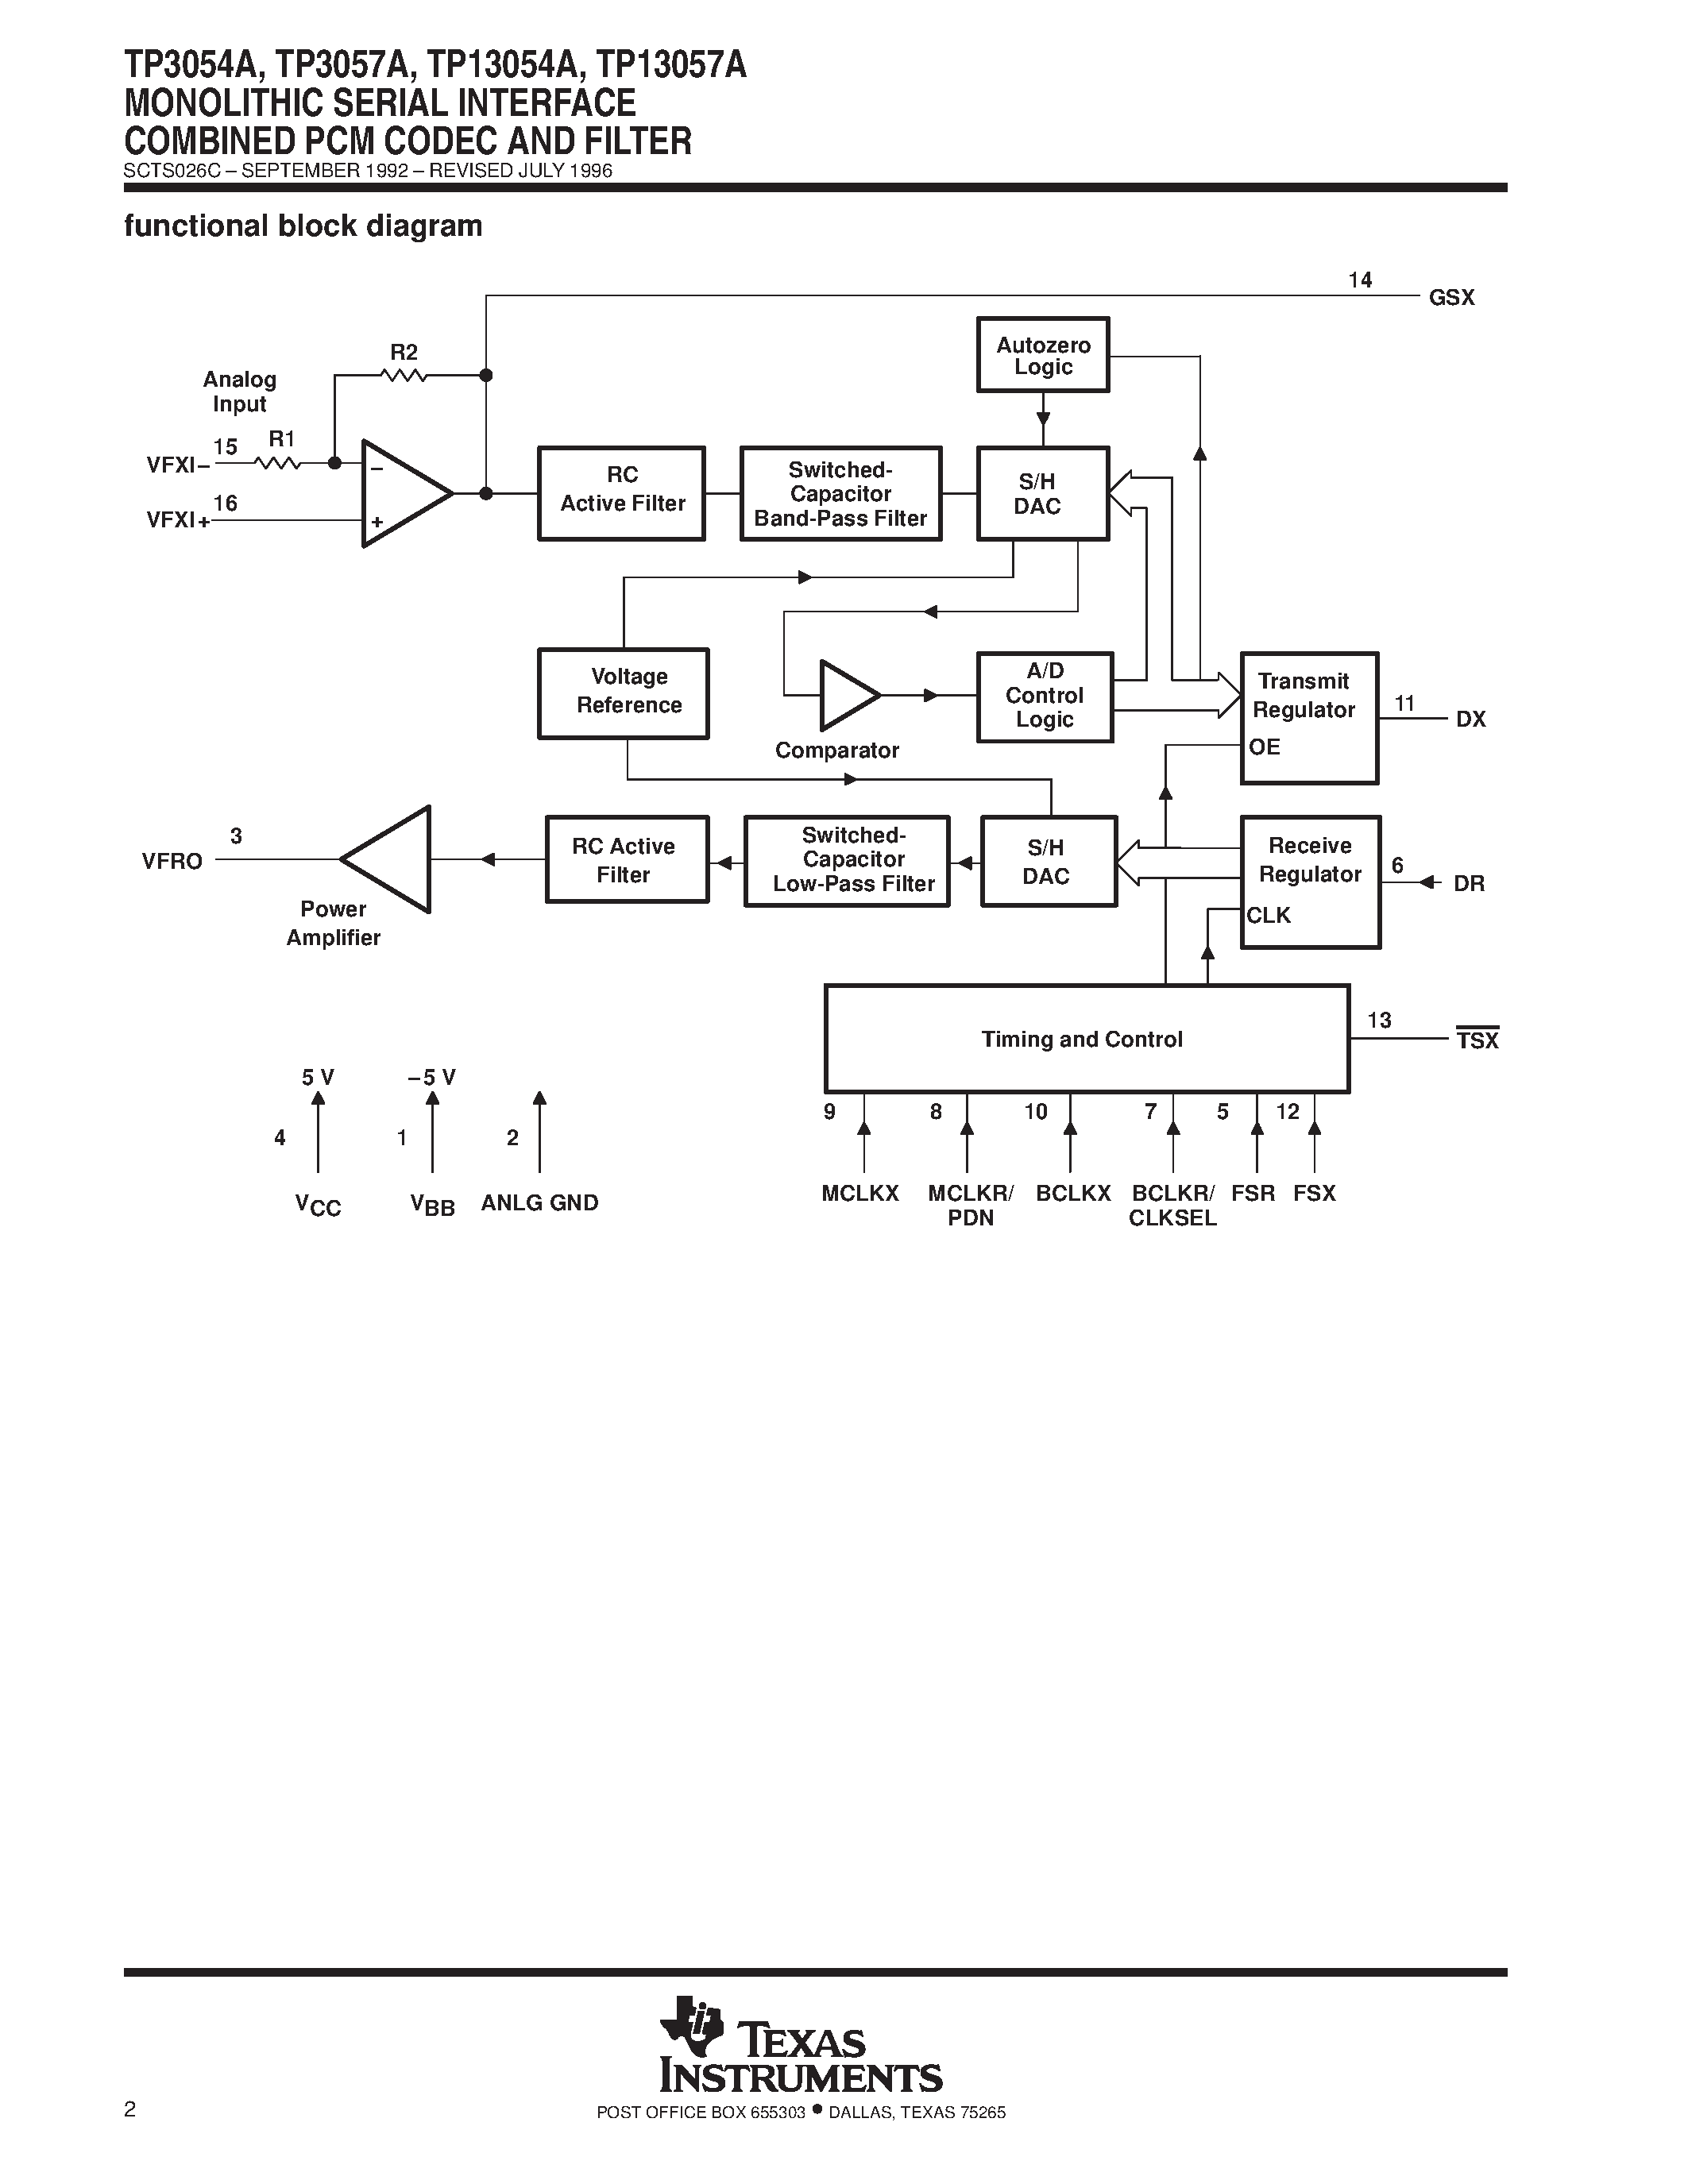 Datasheet TP13057ADW - MONOLITHIC SERIAL INTERFACE COMBINED PCM CODEC AND FILTER page 2